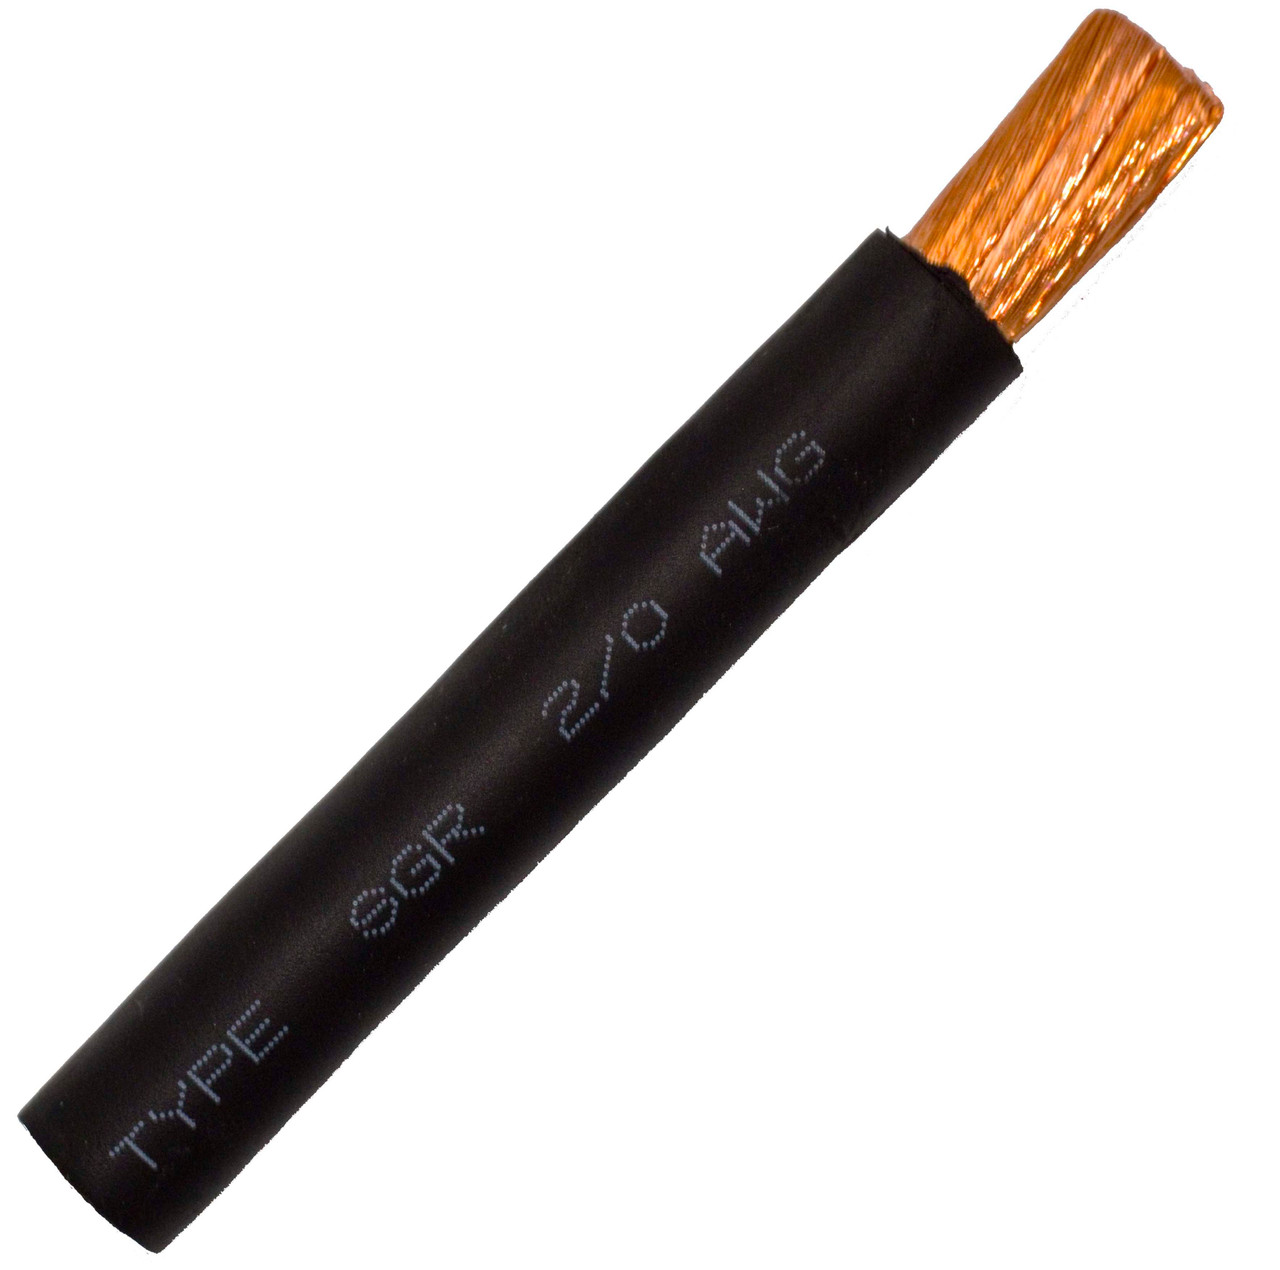 1 AWG @ 250' Premium EPDM Insulated SGR Battery/Starter Cable  8085-27